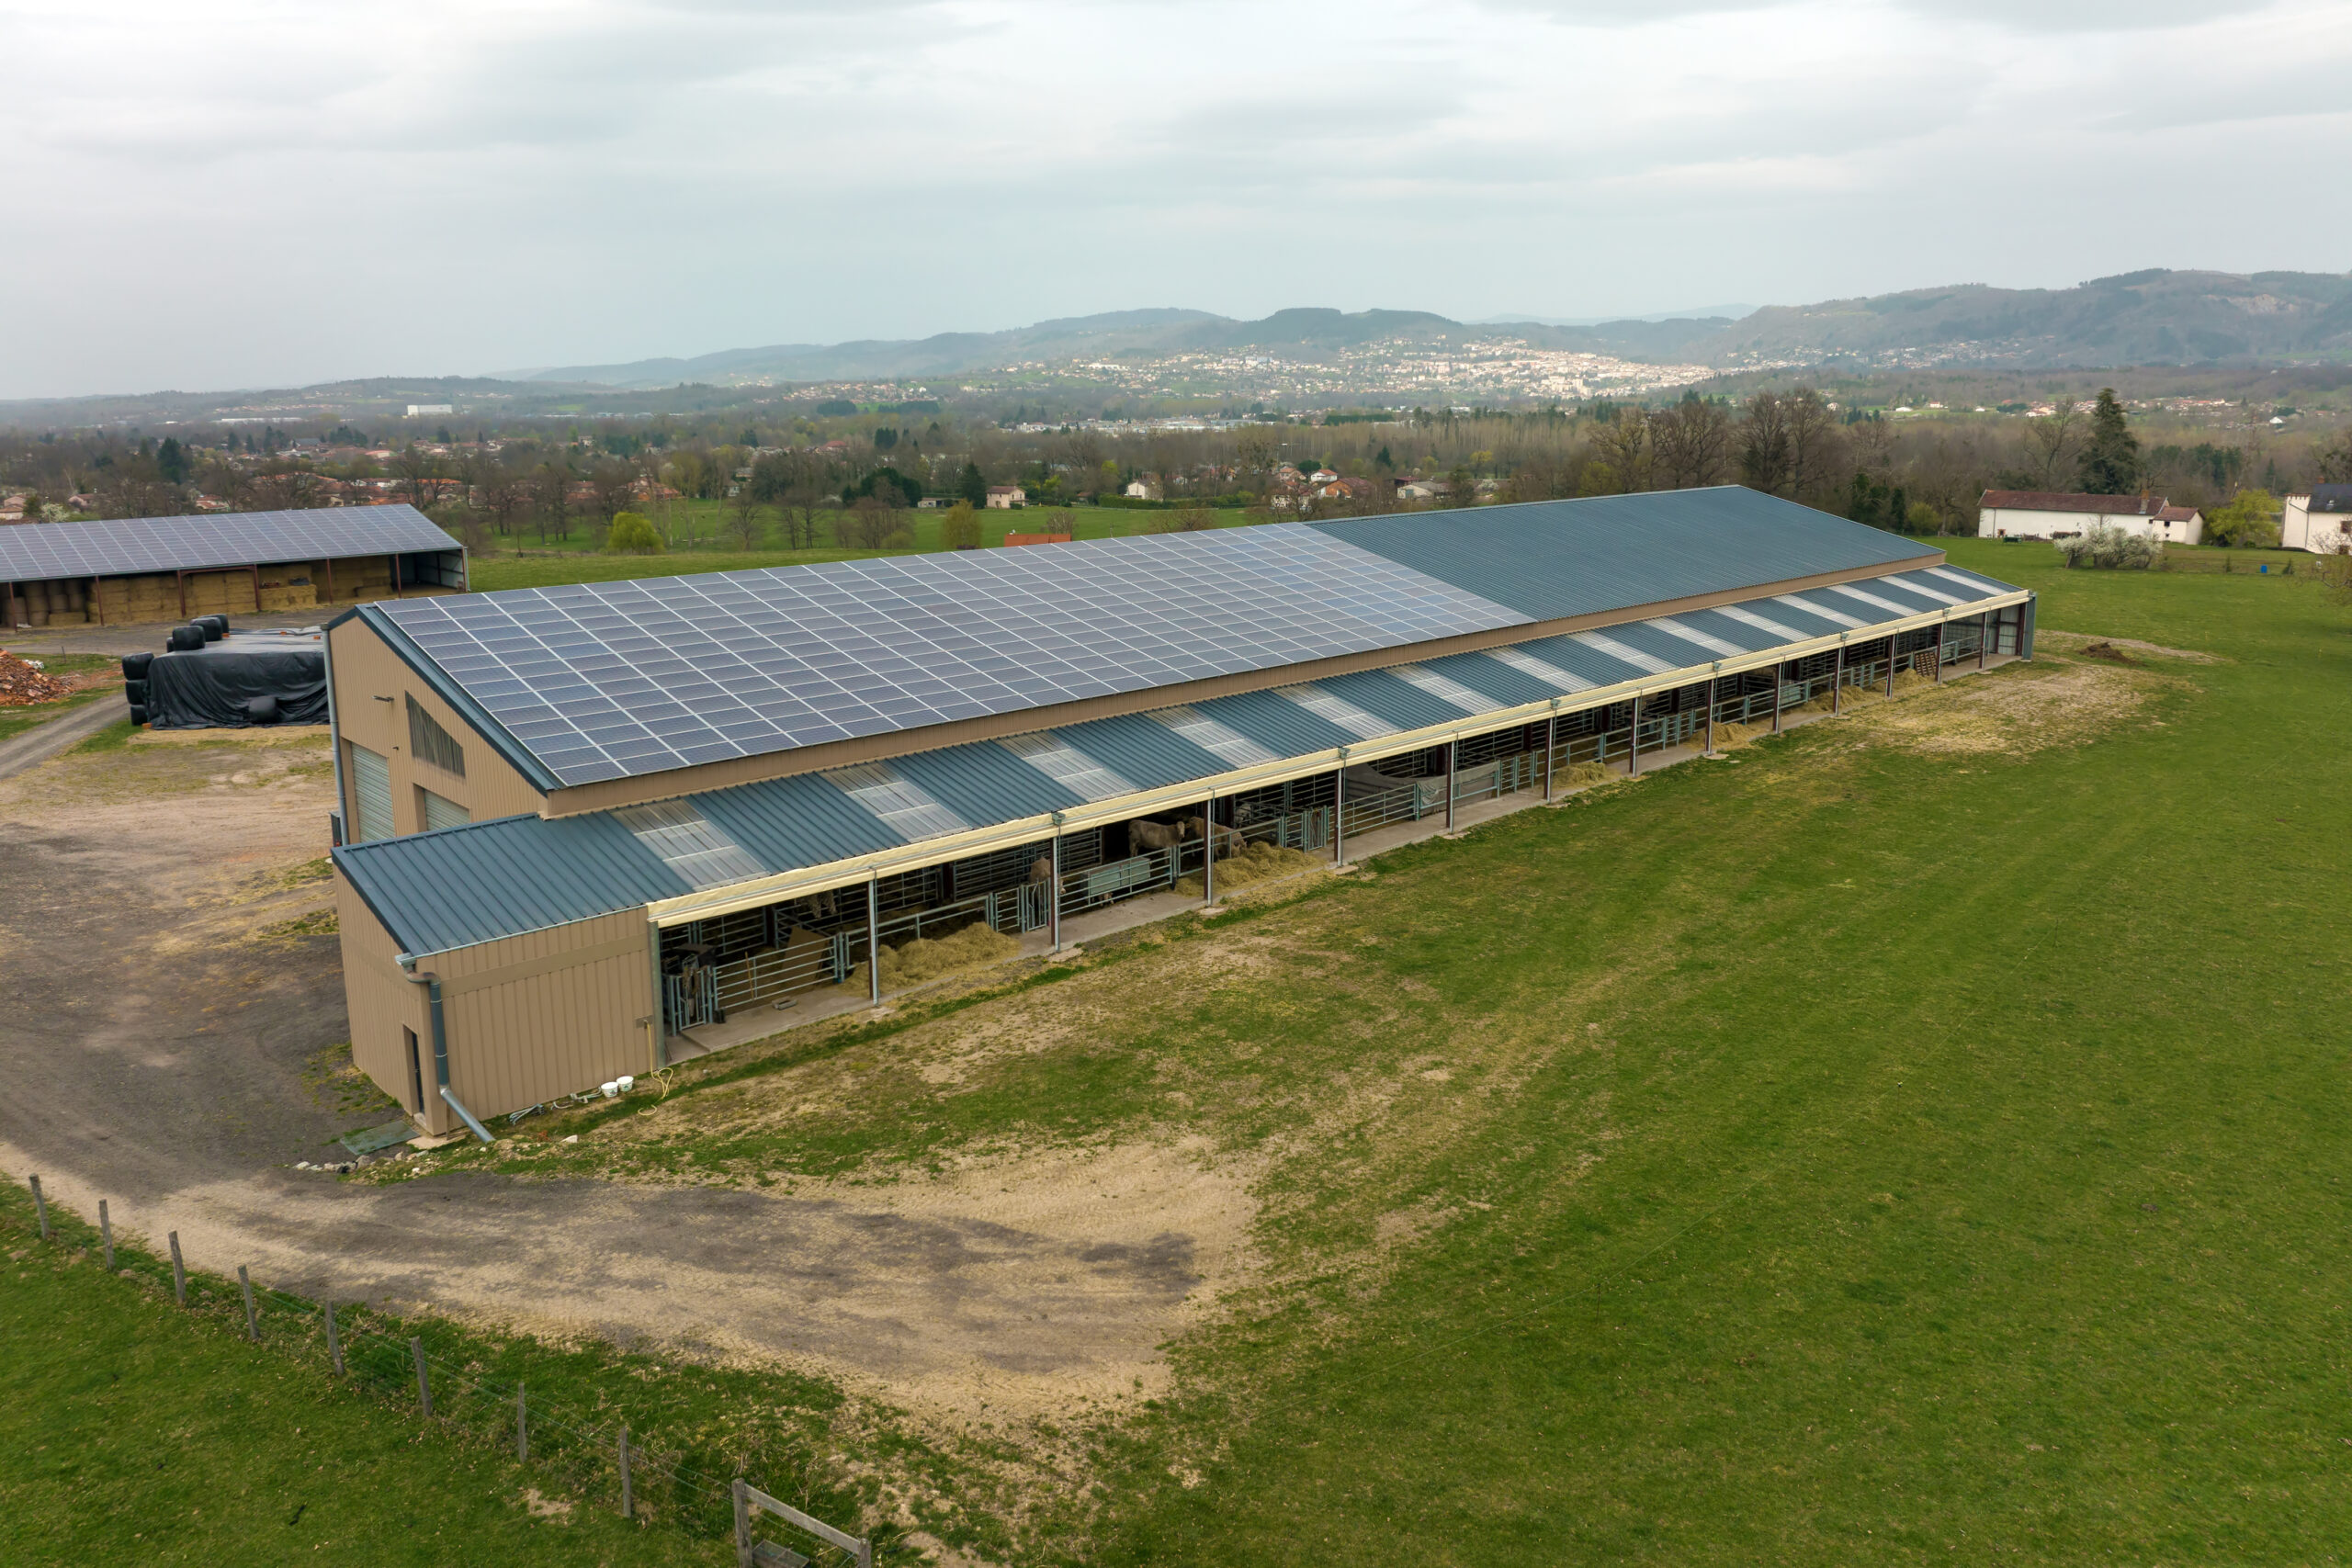 Aerial view of farm building with photovoltaic solar panels mounted on rooftop for producing clean ecological electricity